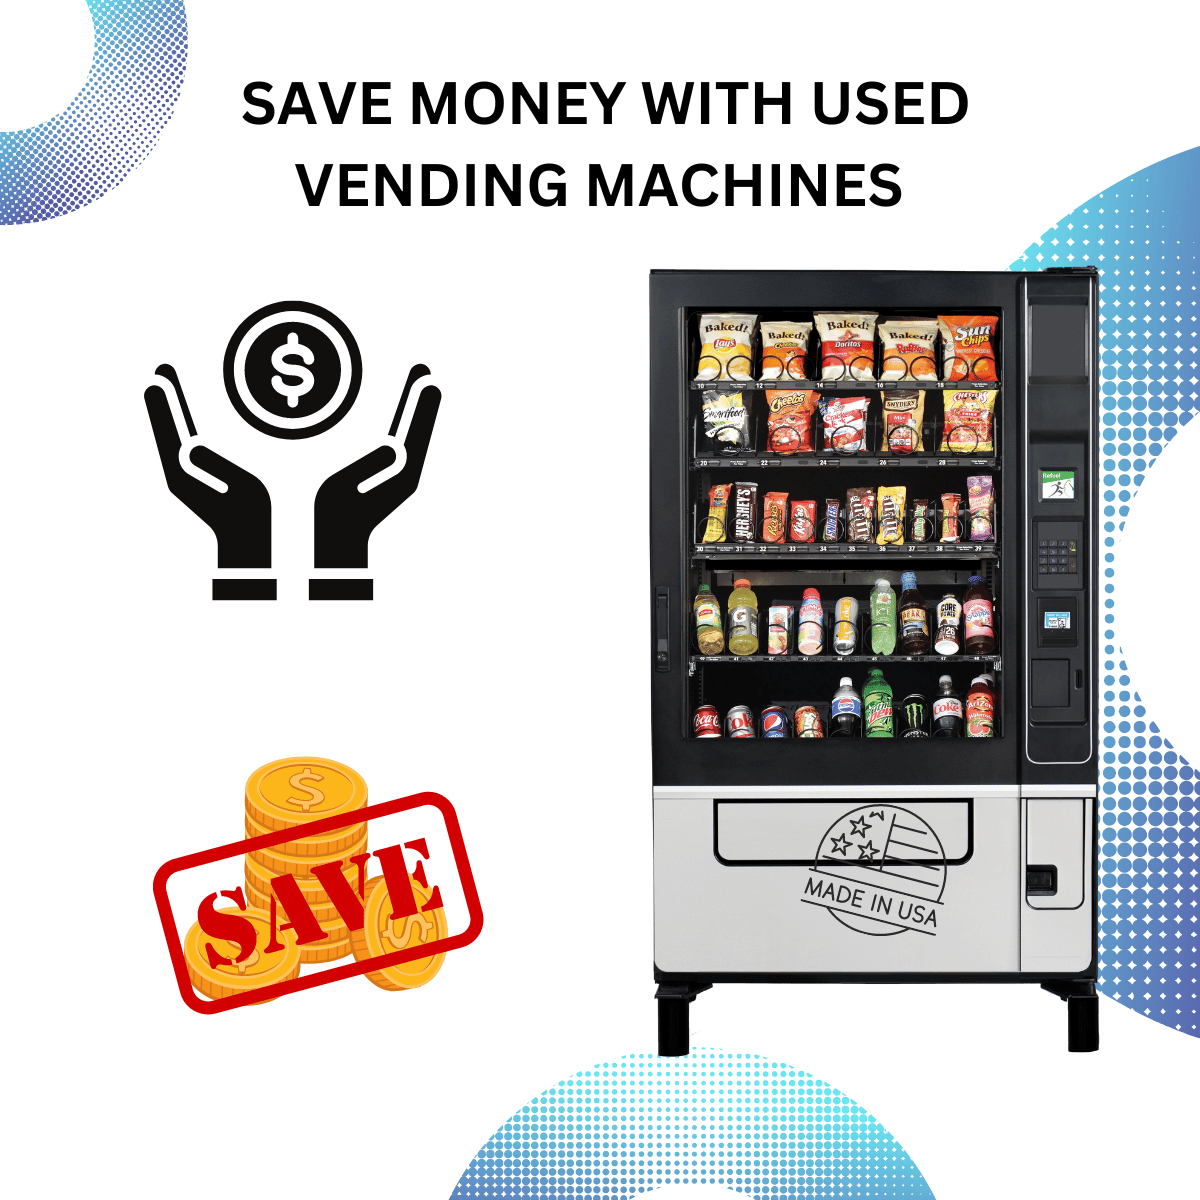 YOU CAN SAVE MONEY WITH USED VENDING MACHINES